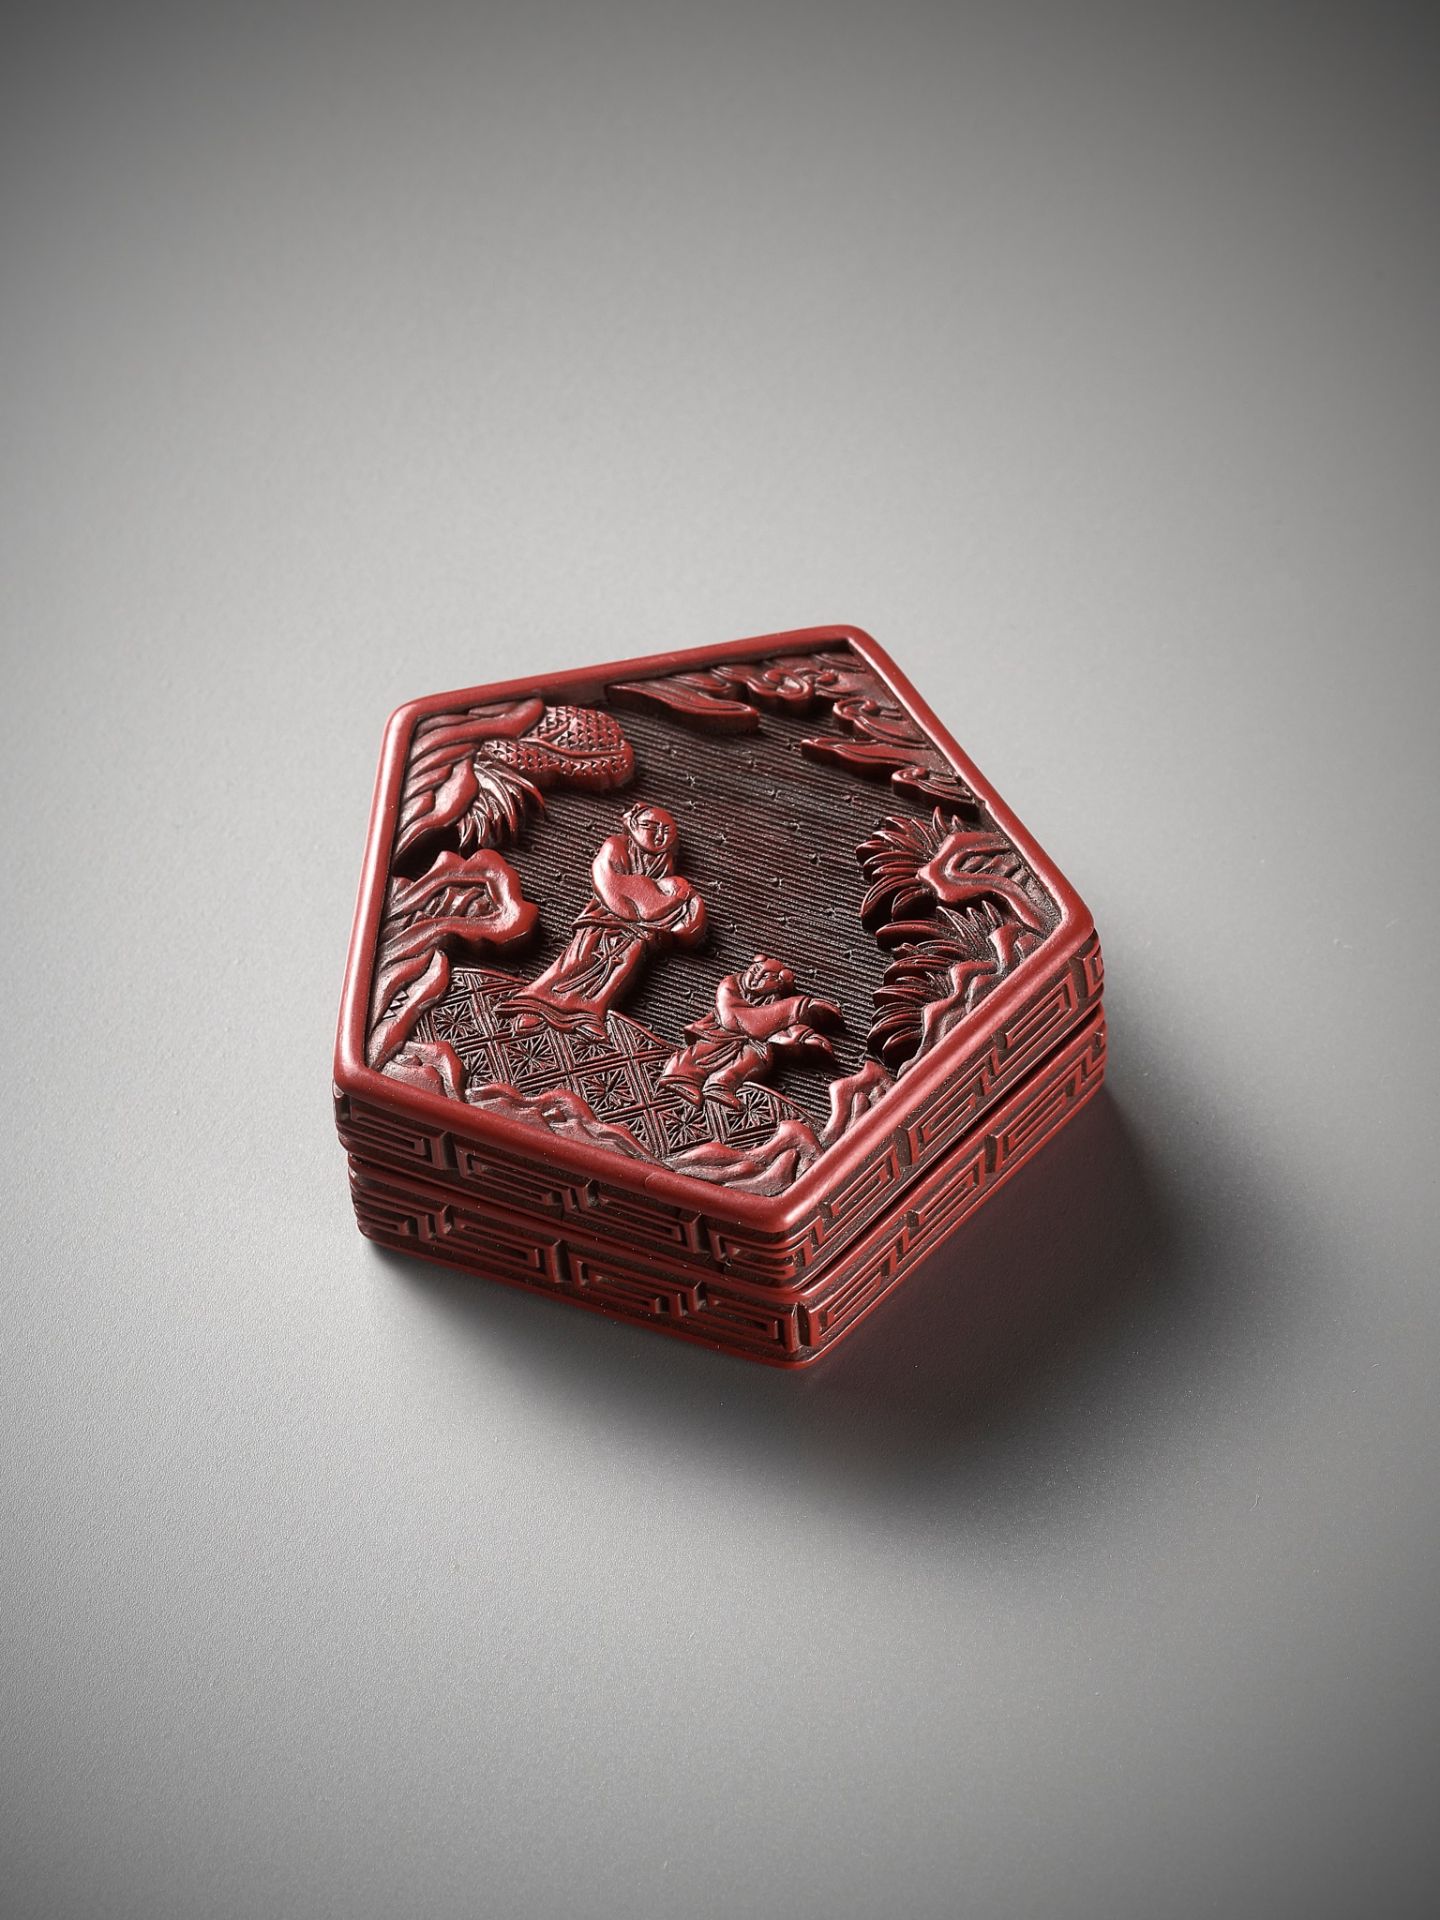 A SMALL CINNABAR LACQUER BOX AND COVER, YUAN TO MID-MING DYNASTY - Image 4 of 12